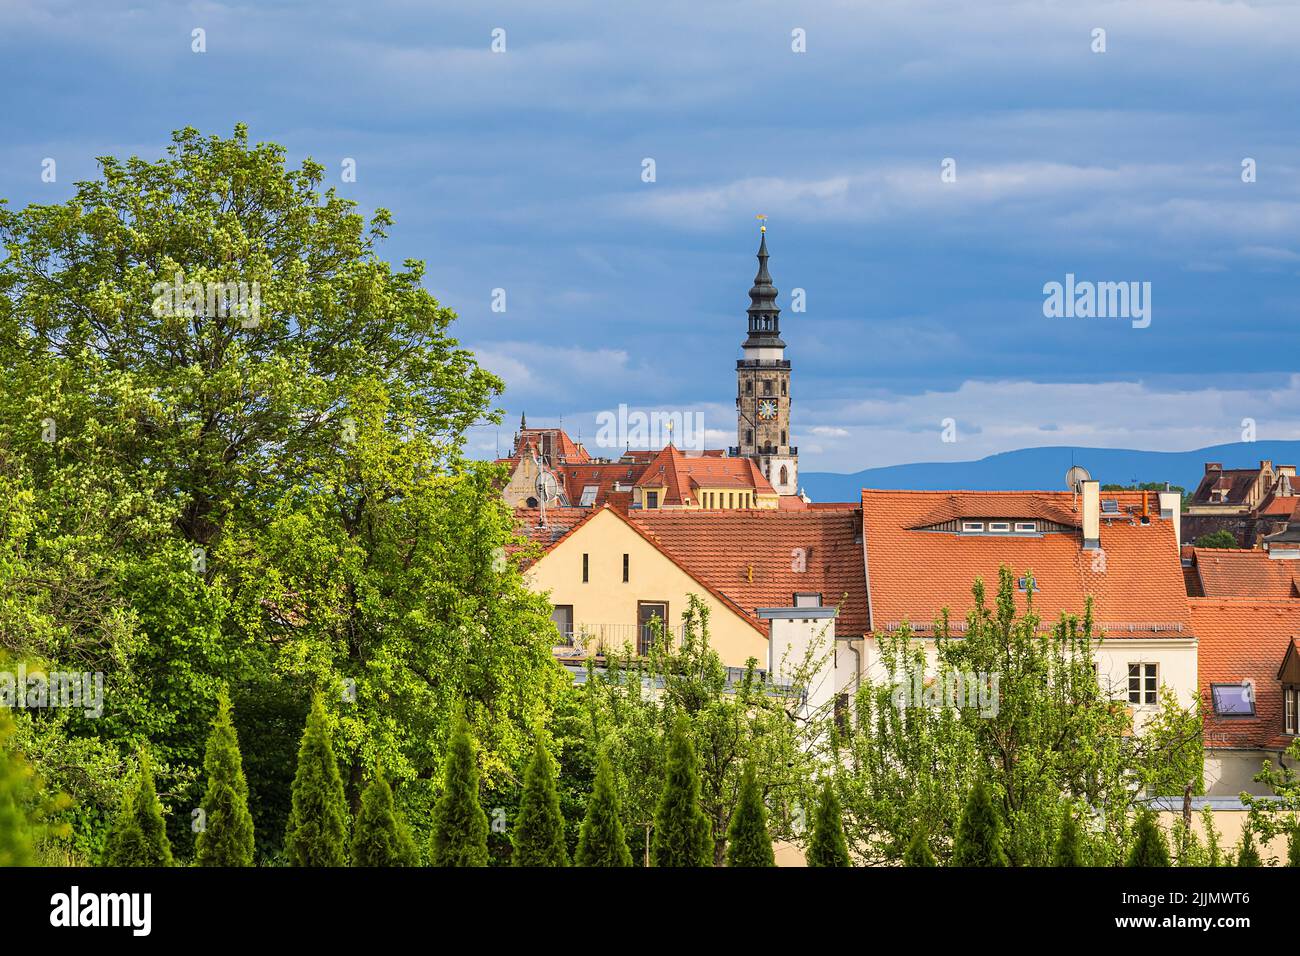 View to the tower of the city hall in Goerlitz, Germany. Stock Photo